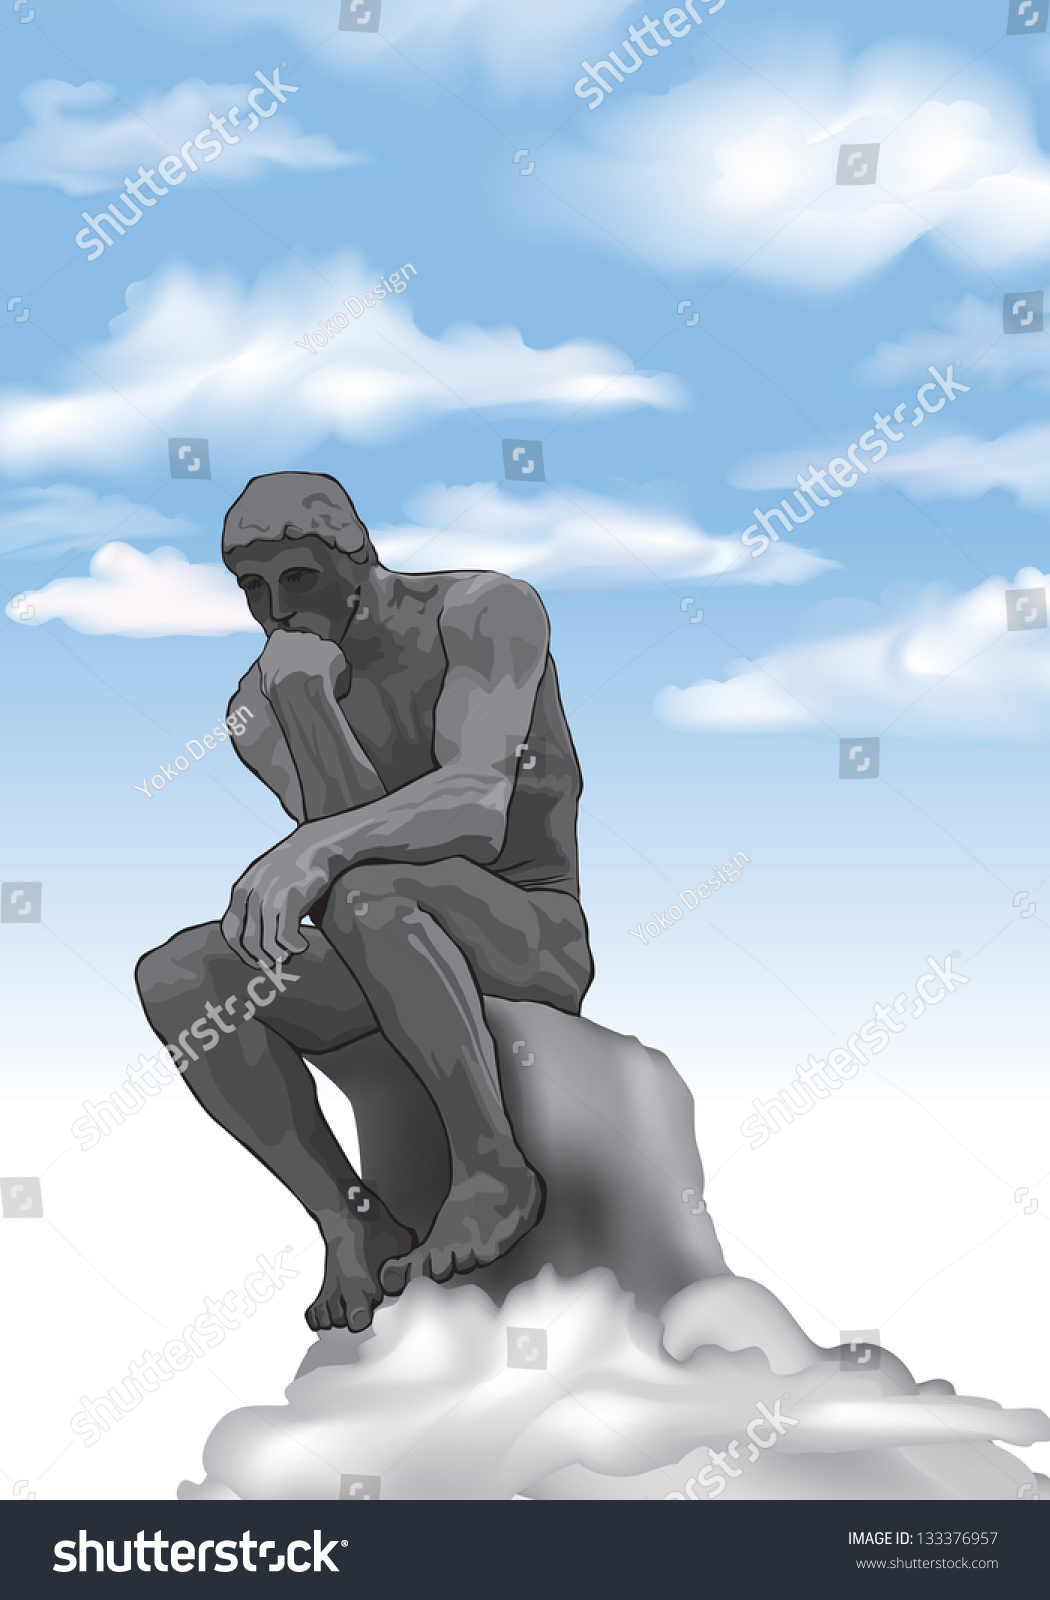 Thinker Man Concept Illustration. The Thinker Statue By The French